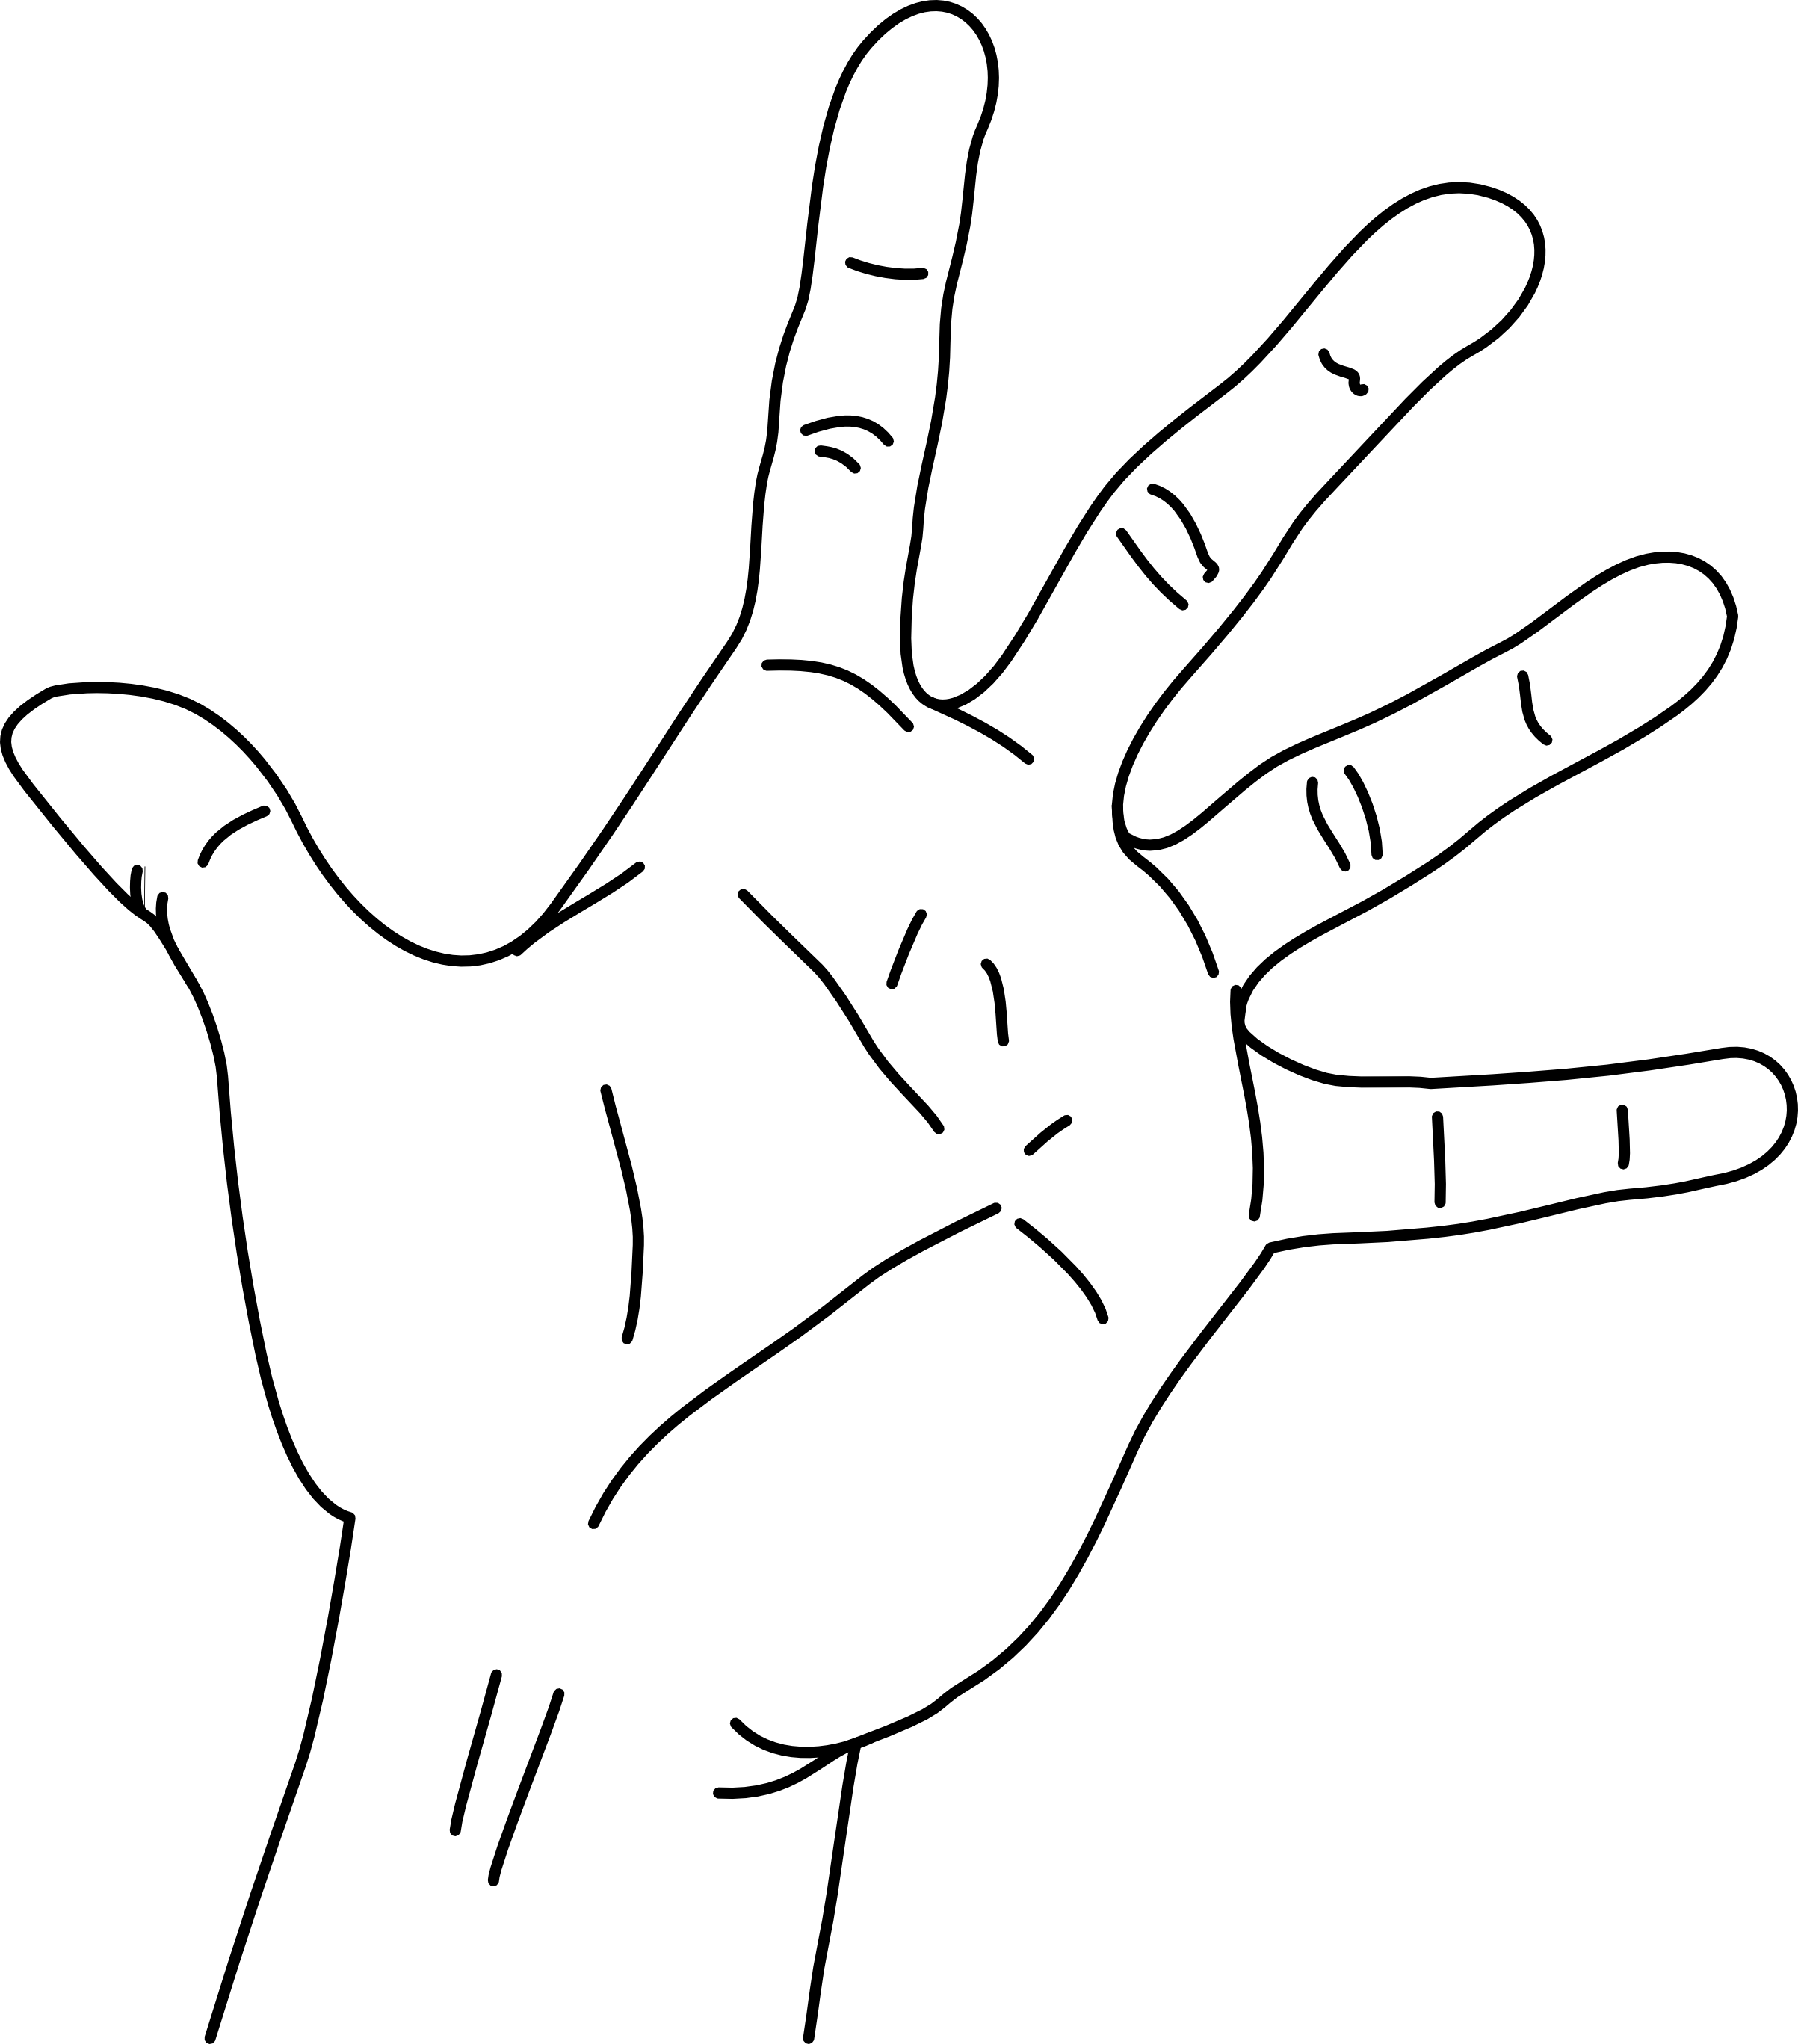 A Hand With Fingers Spread Out